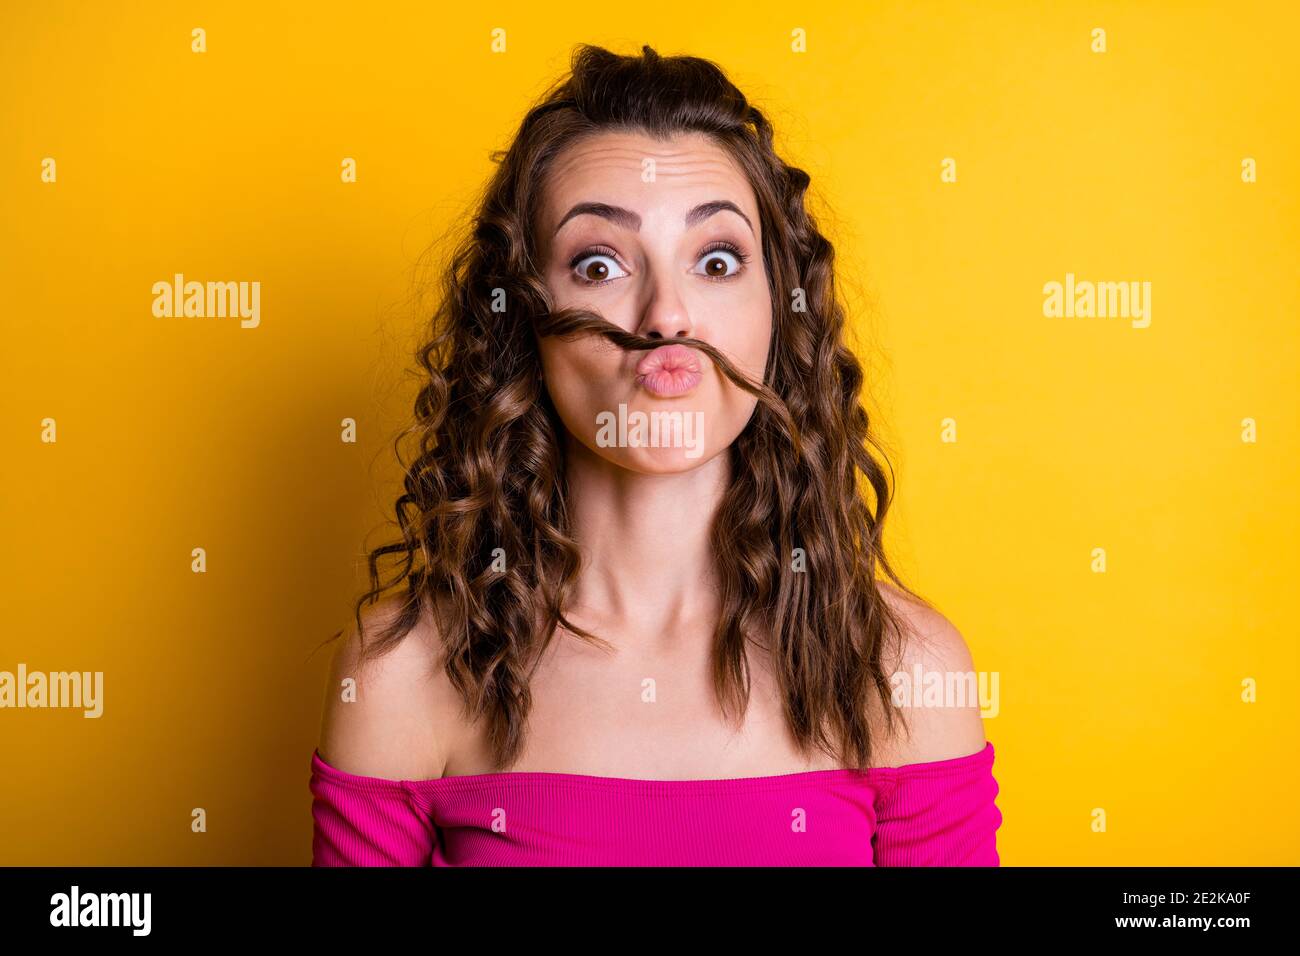 Photo portrait of girl making fake mustache pouting wearing pink crop-top isolated on vivid yellow colored background Stock Photo